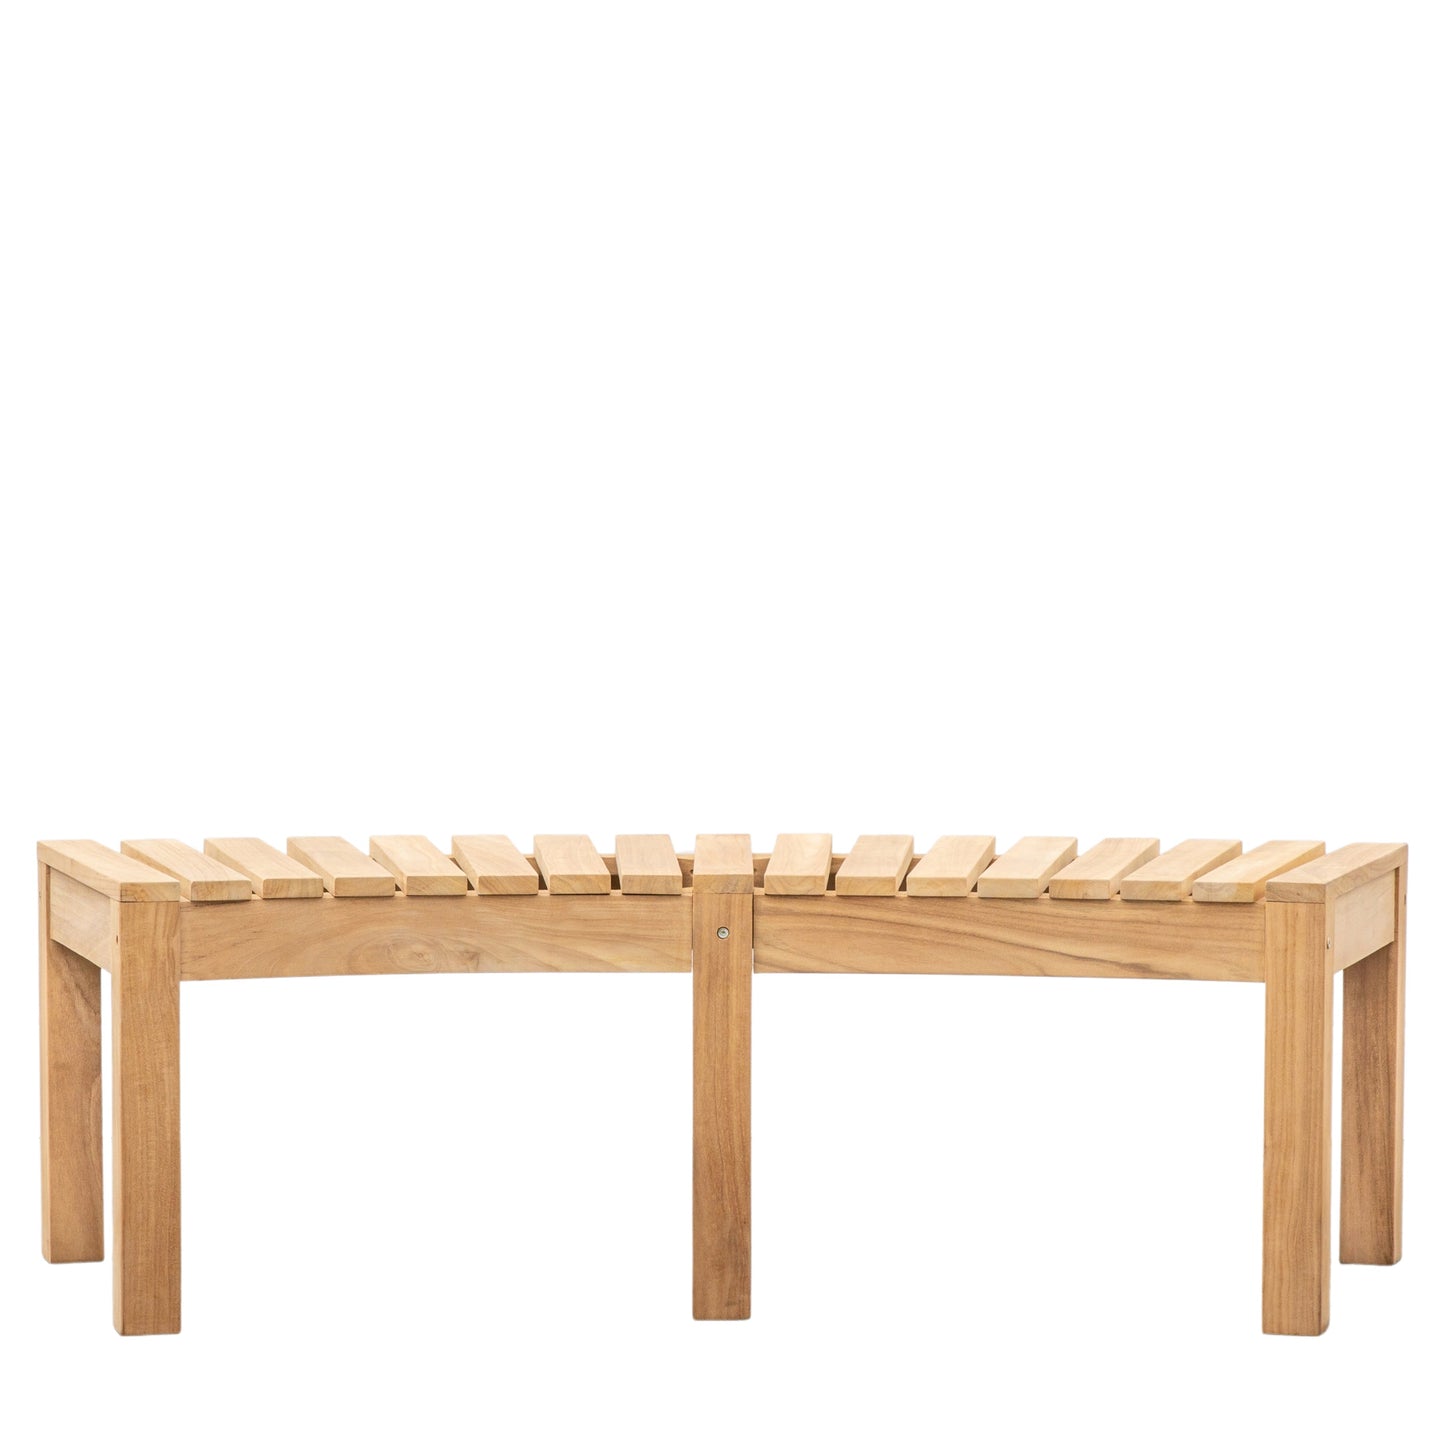 An Ottery Bench from Kikiathome.co.uk for interior decor.